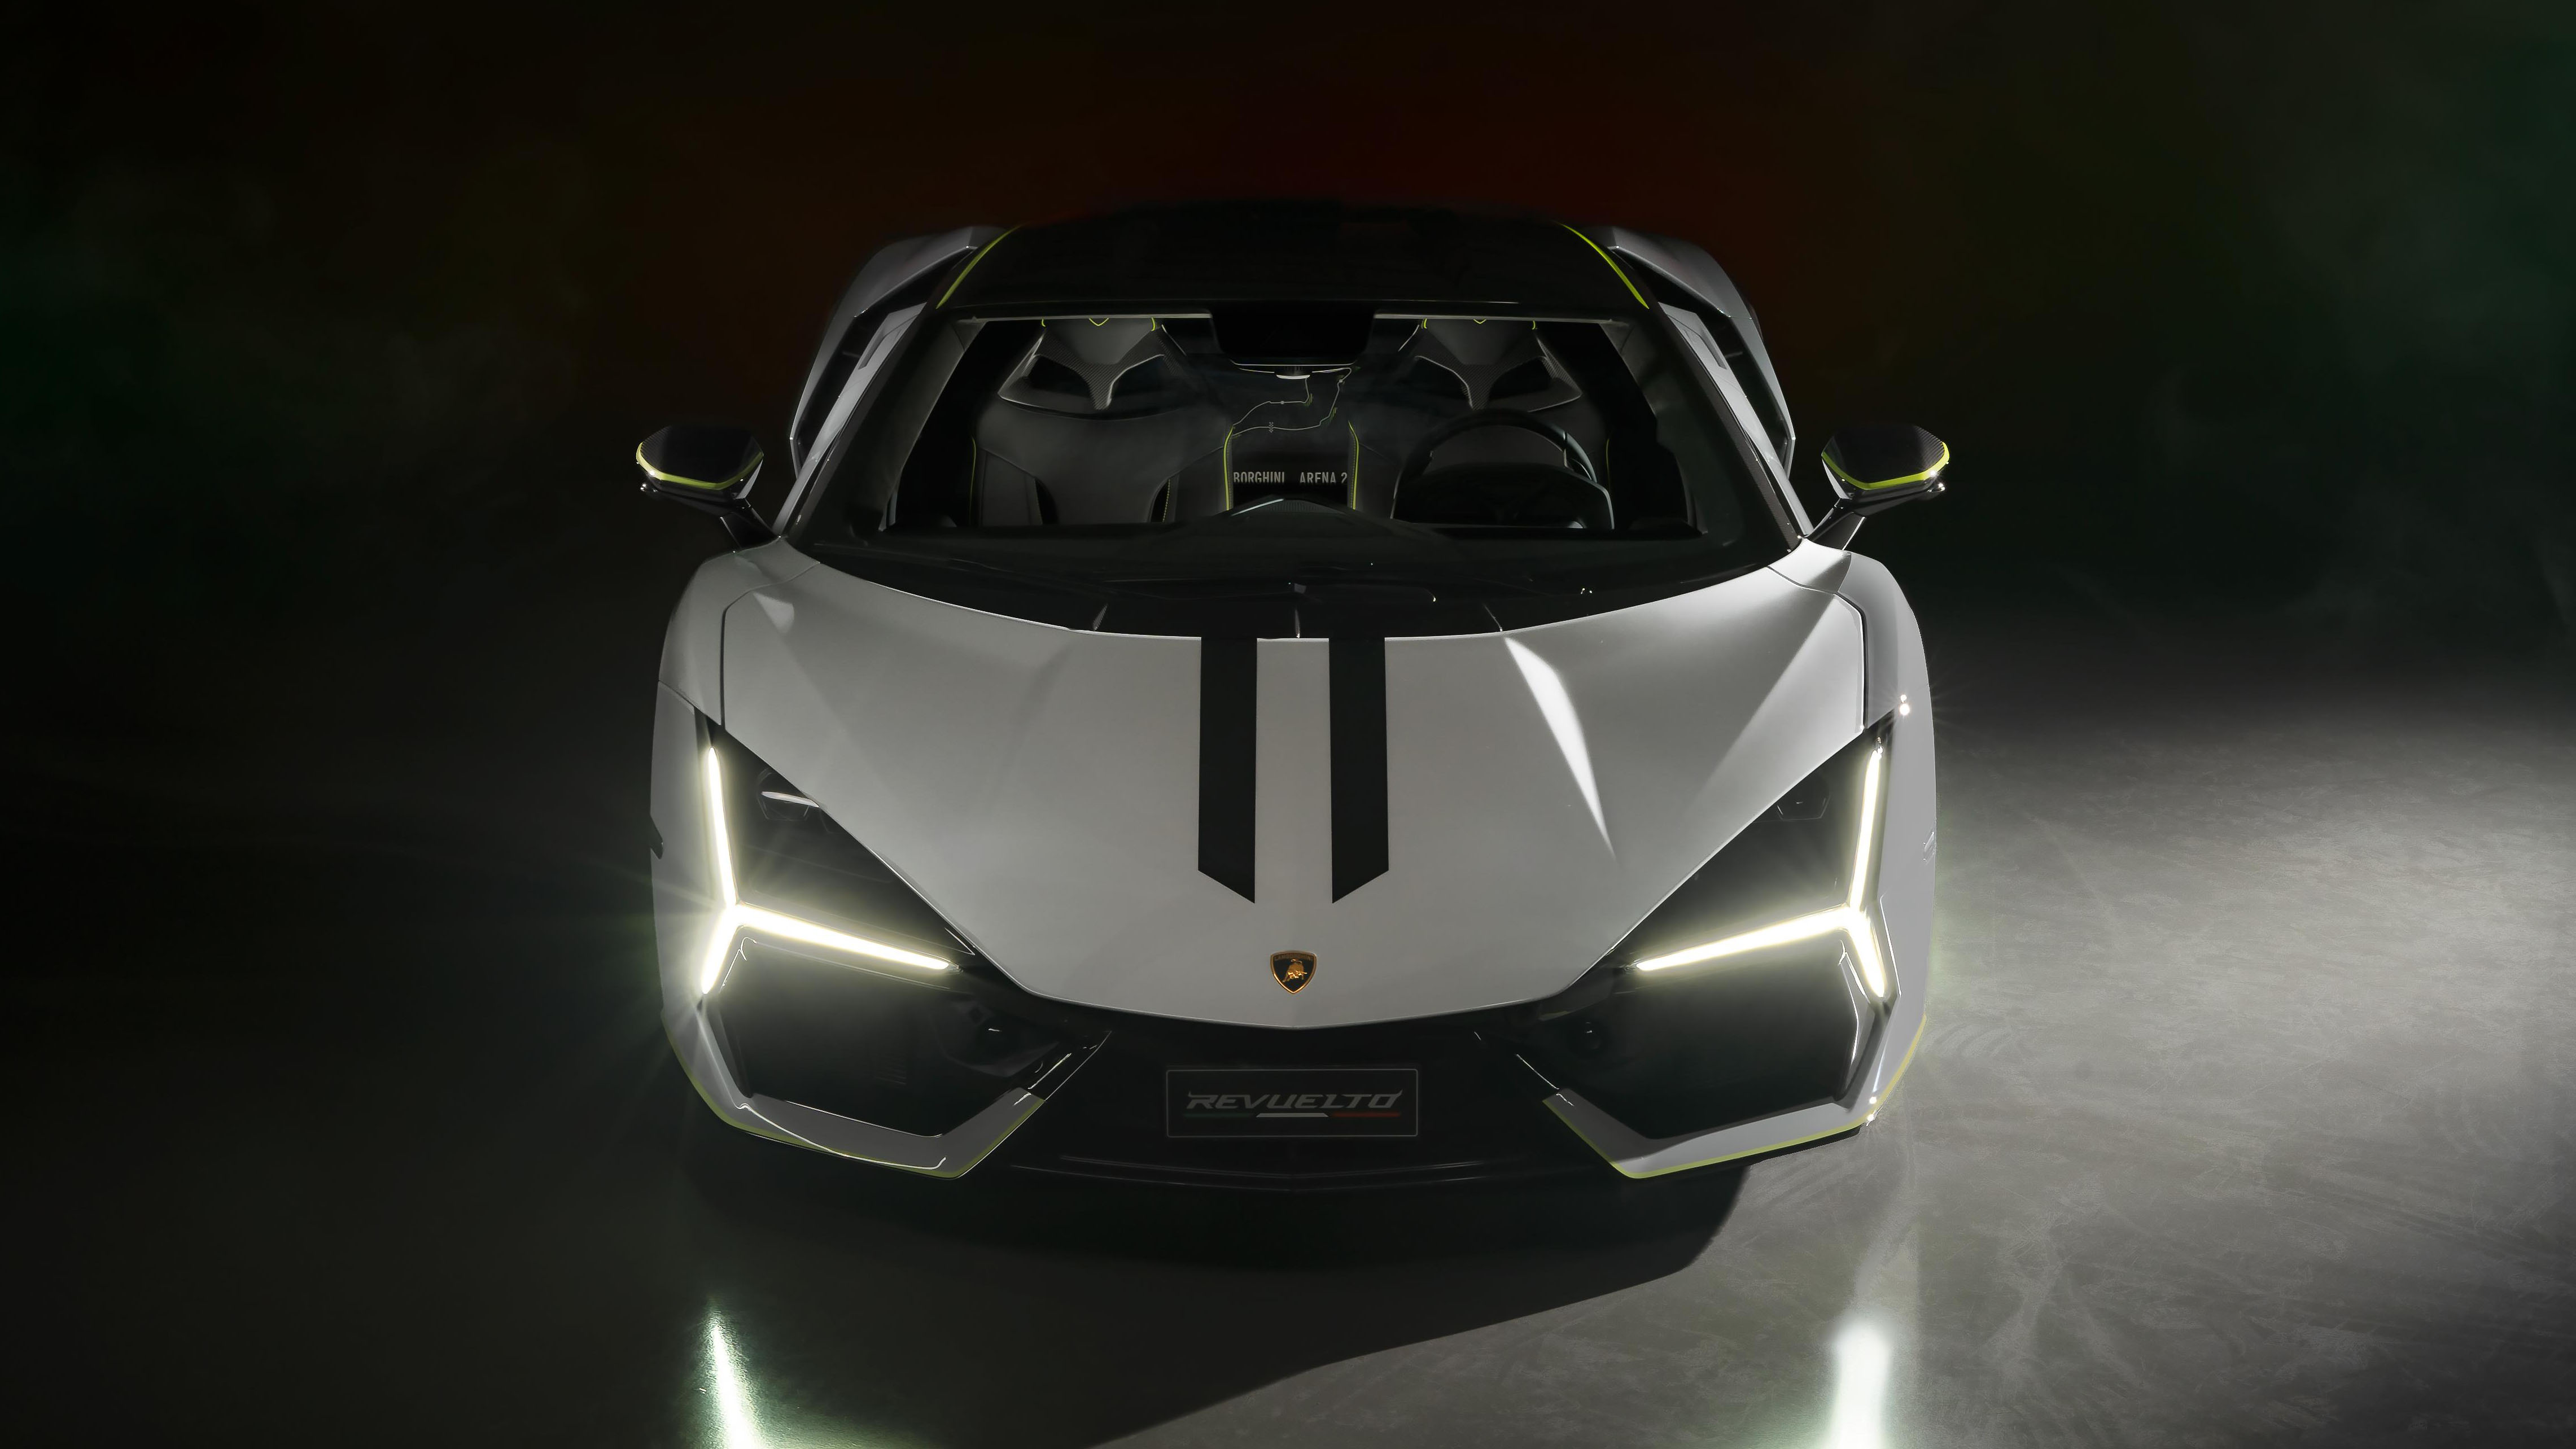 is this one-off lamborghini revuelto a missed opportunity?